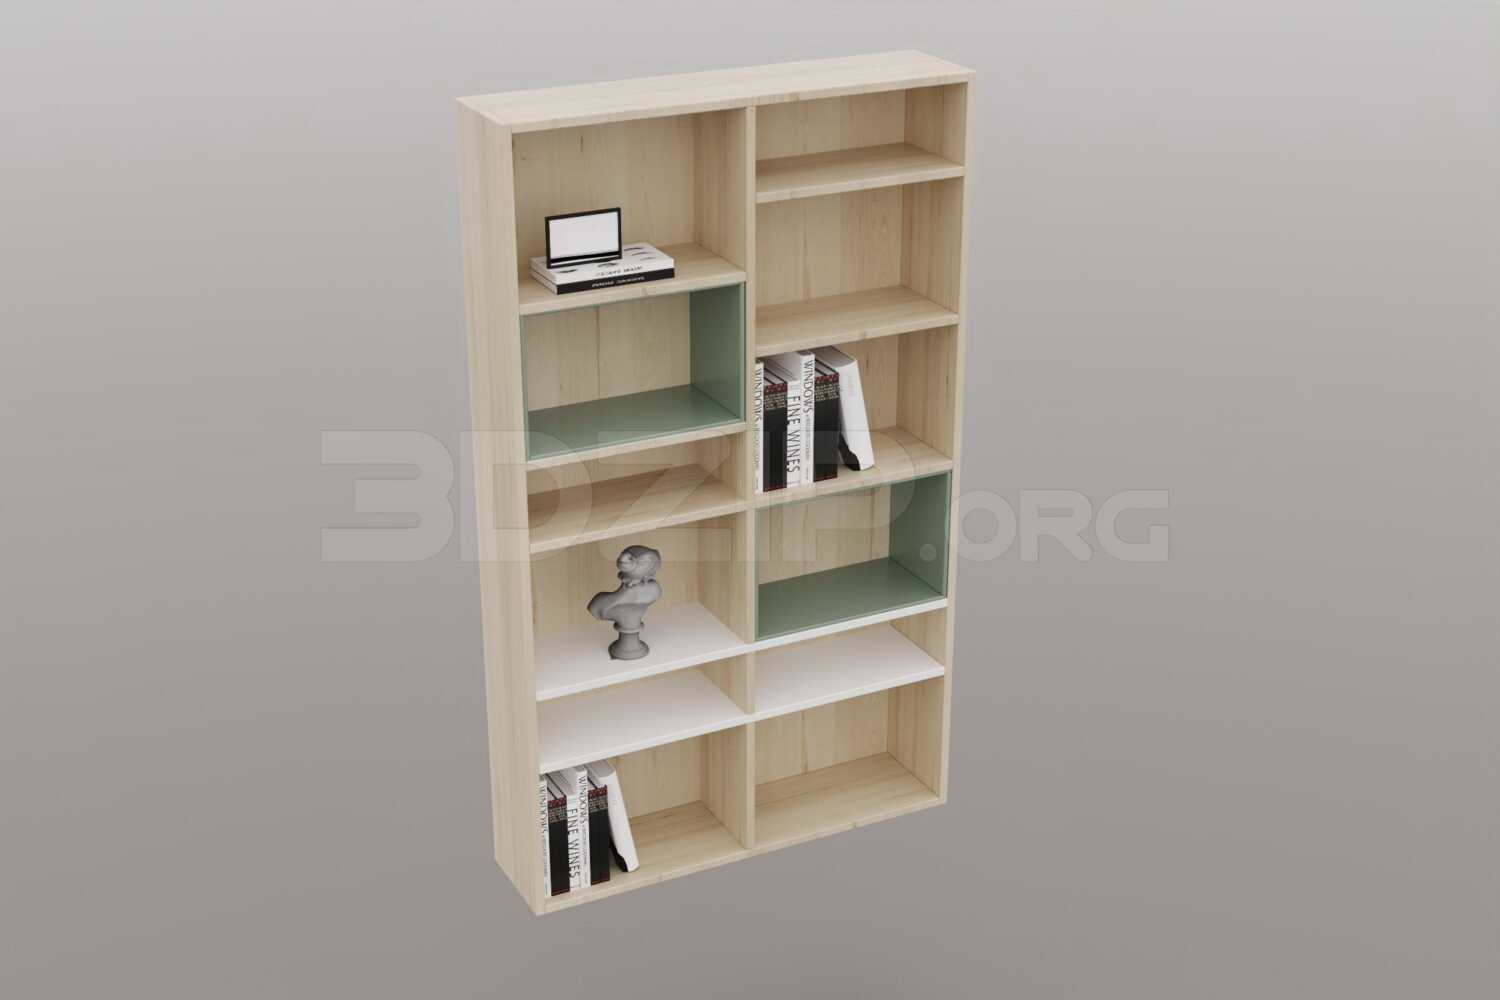 236. Download Free Bookcase Model By Tuan An